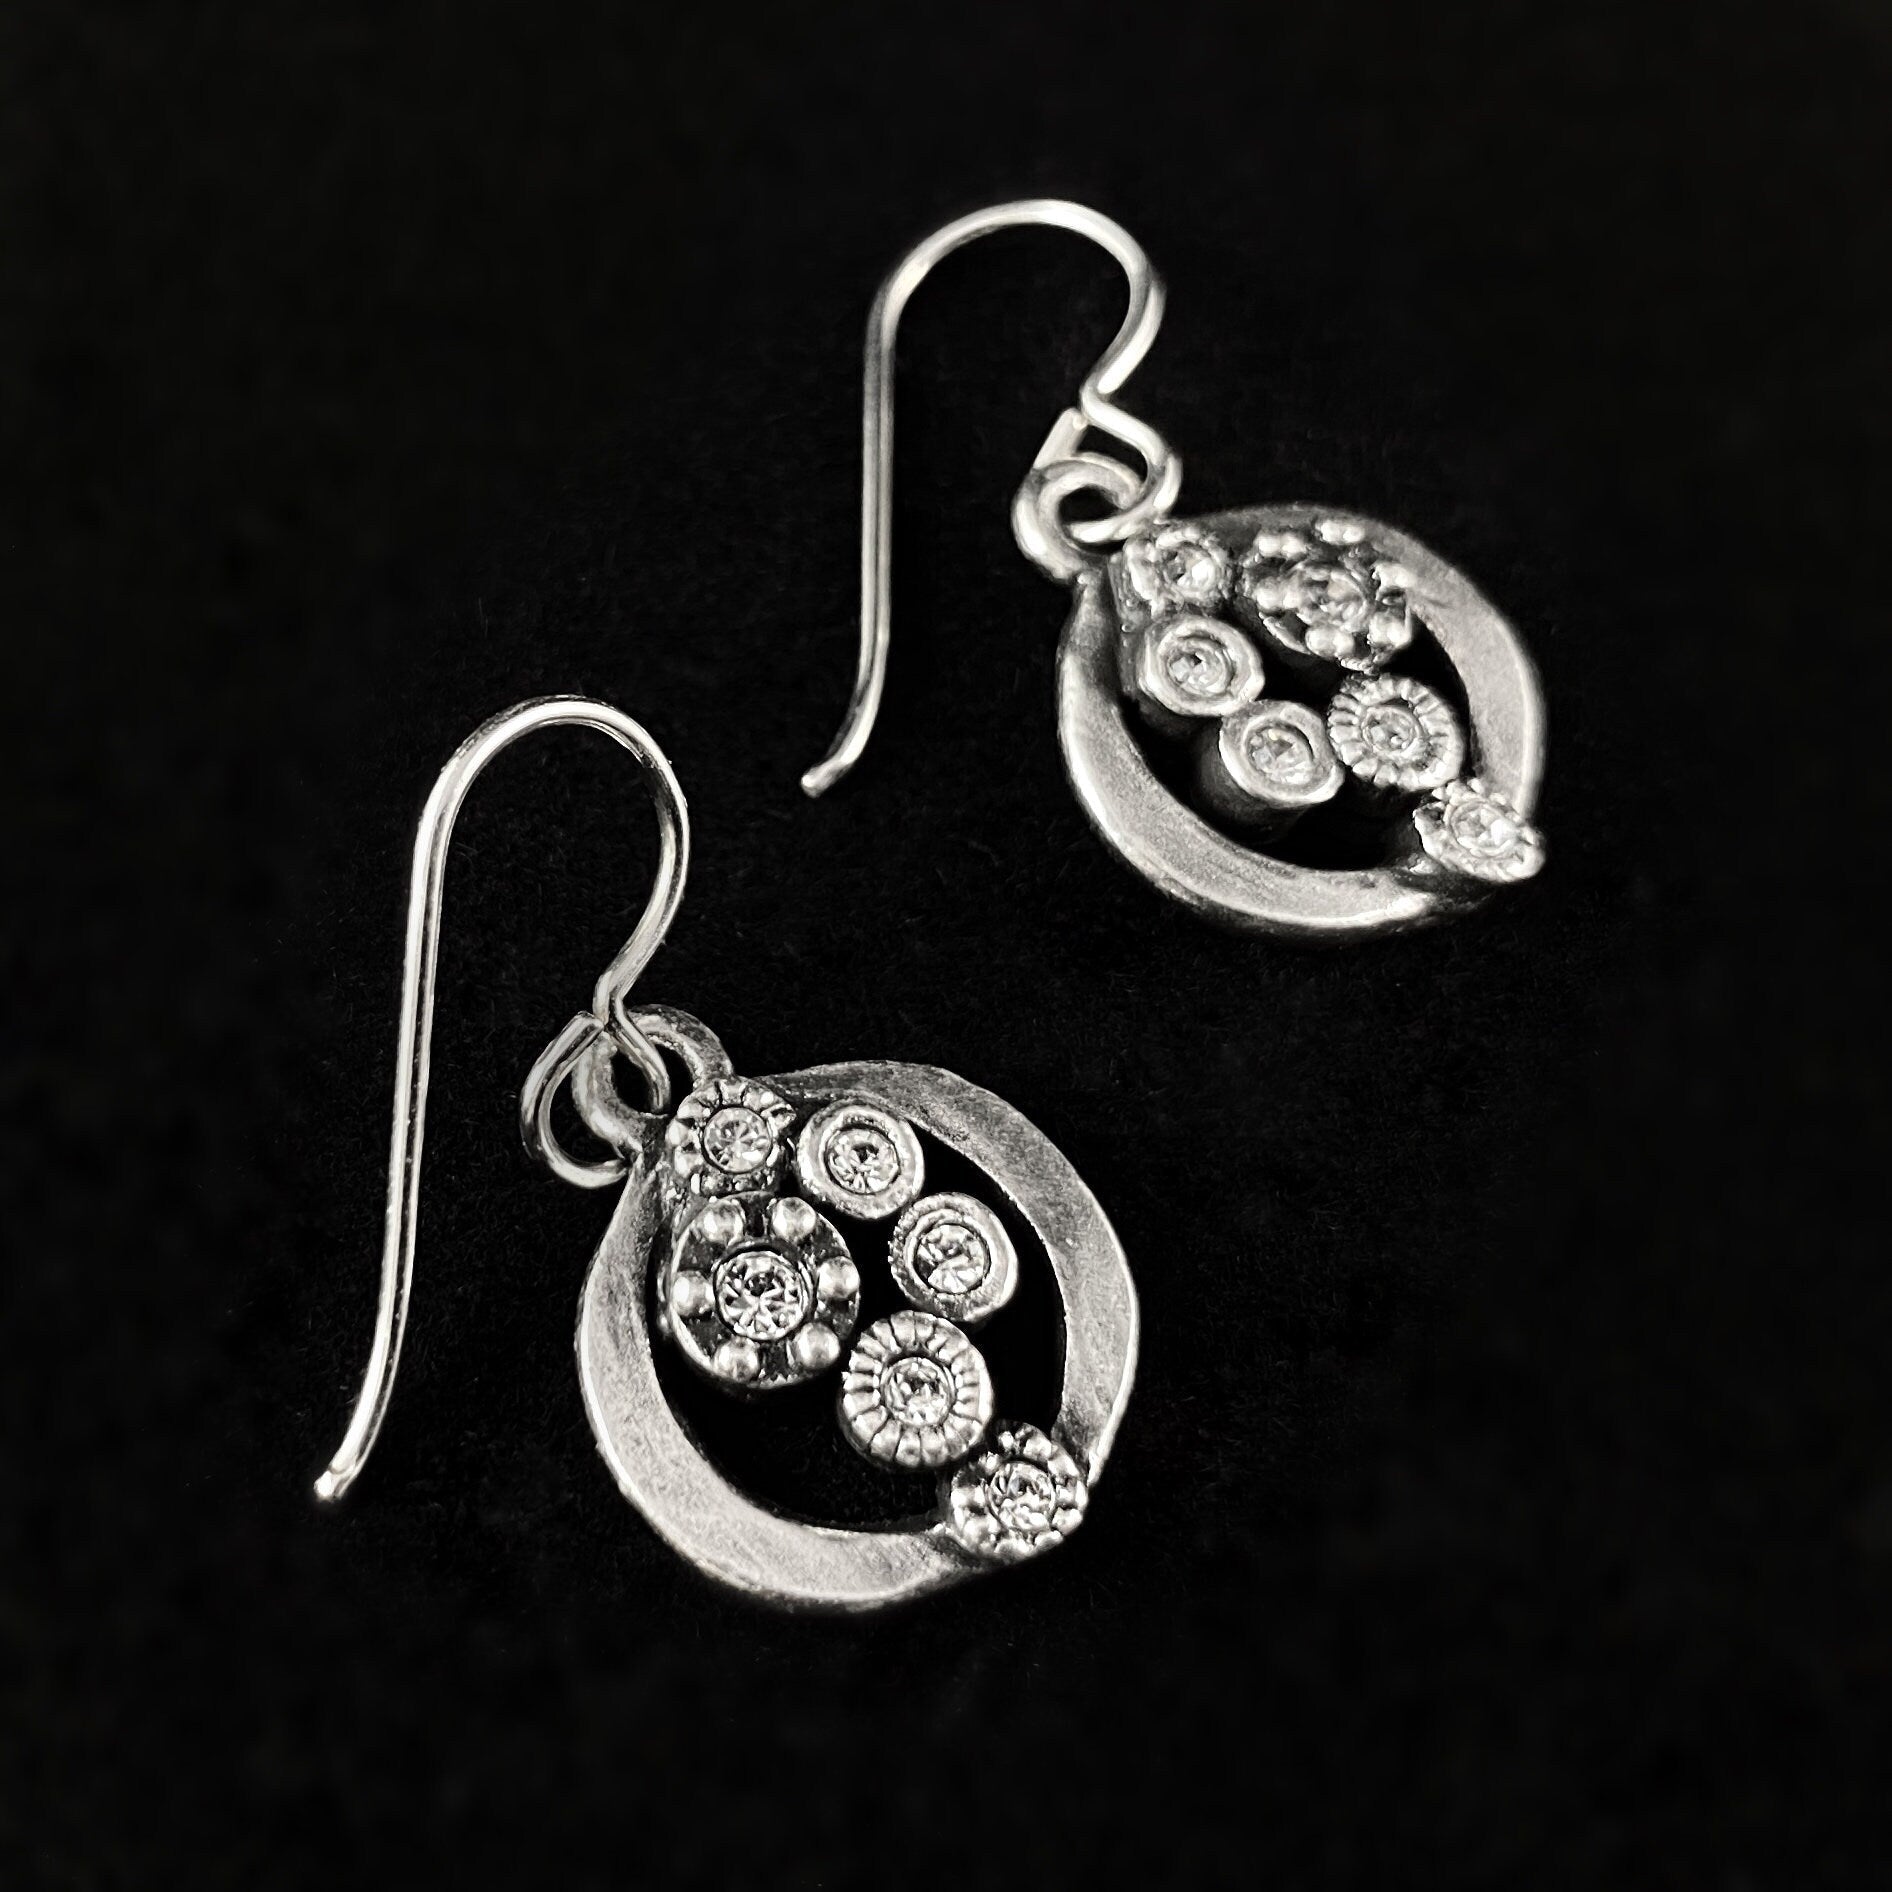 Handmade Silver Circle Earrings with Crystals - Lily Pad